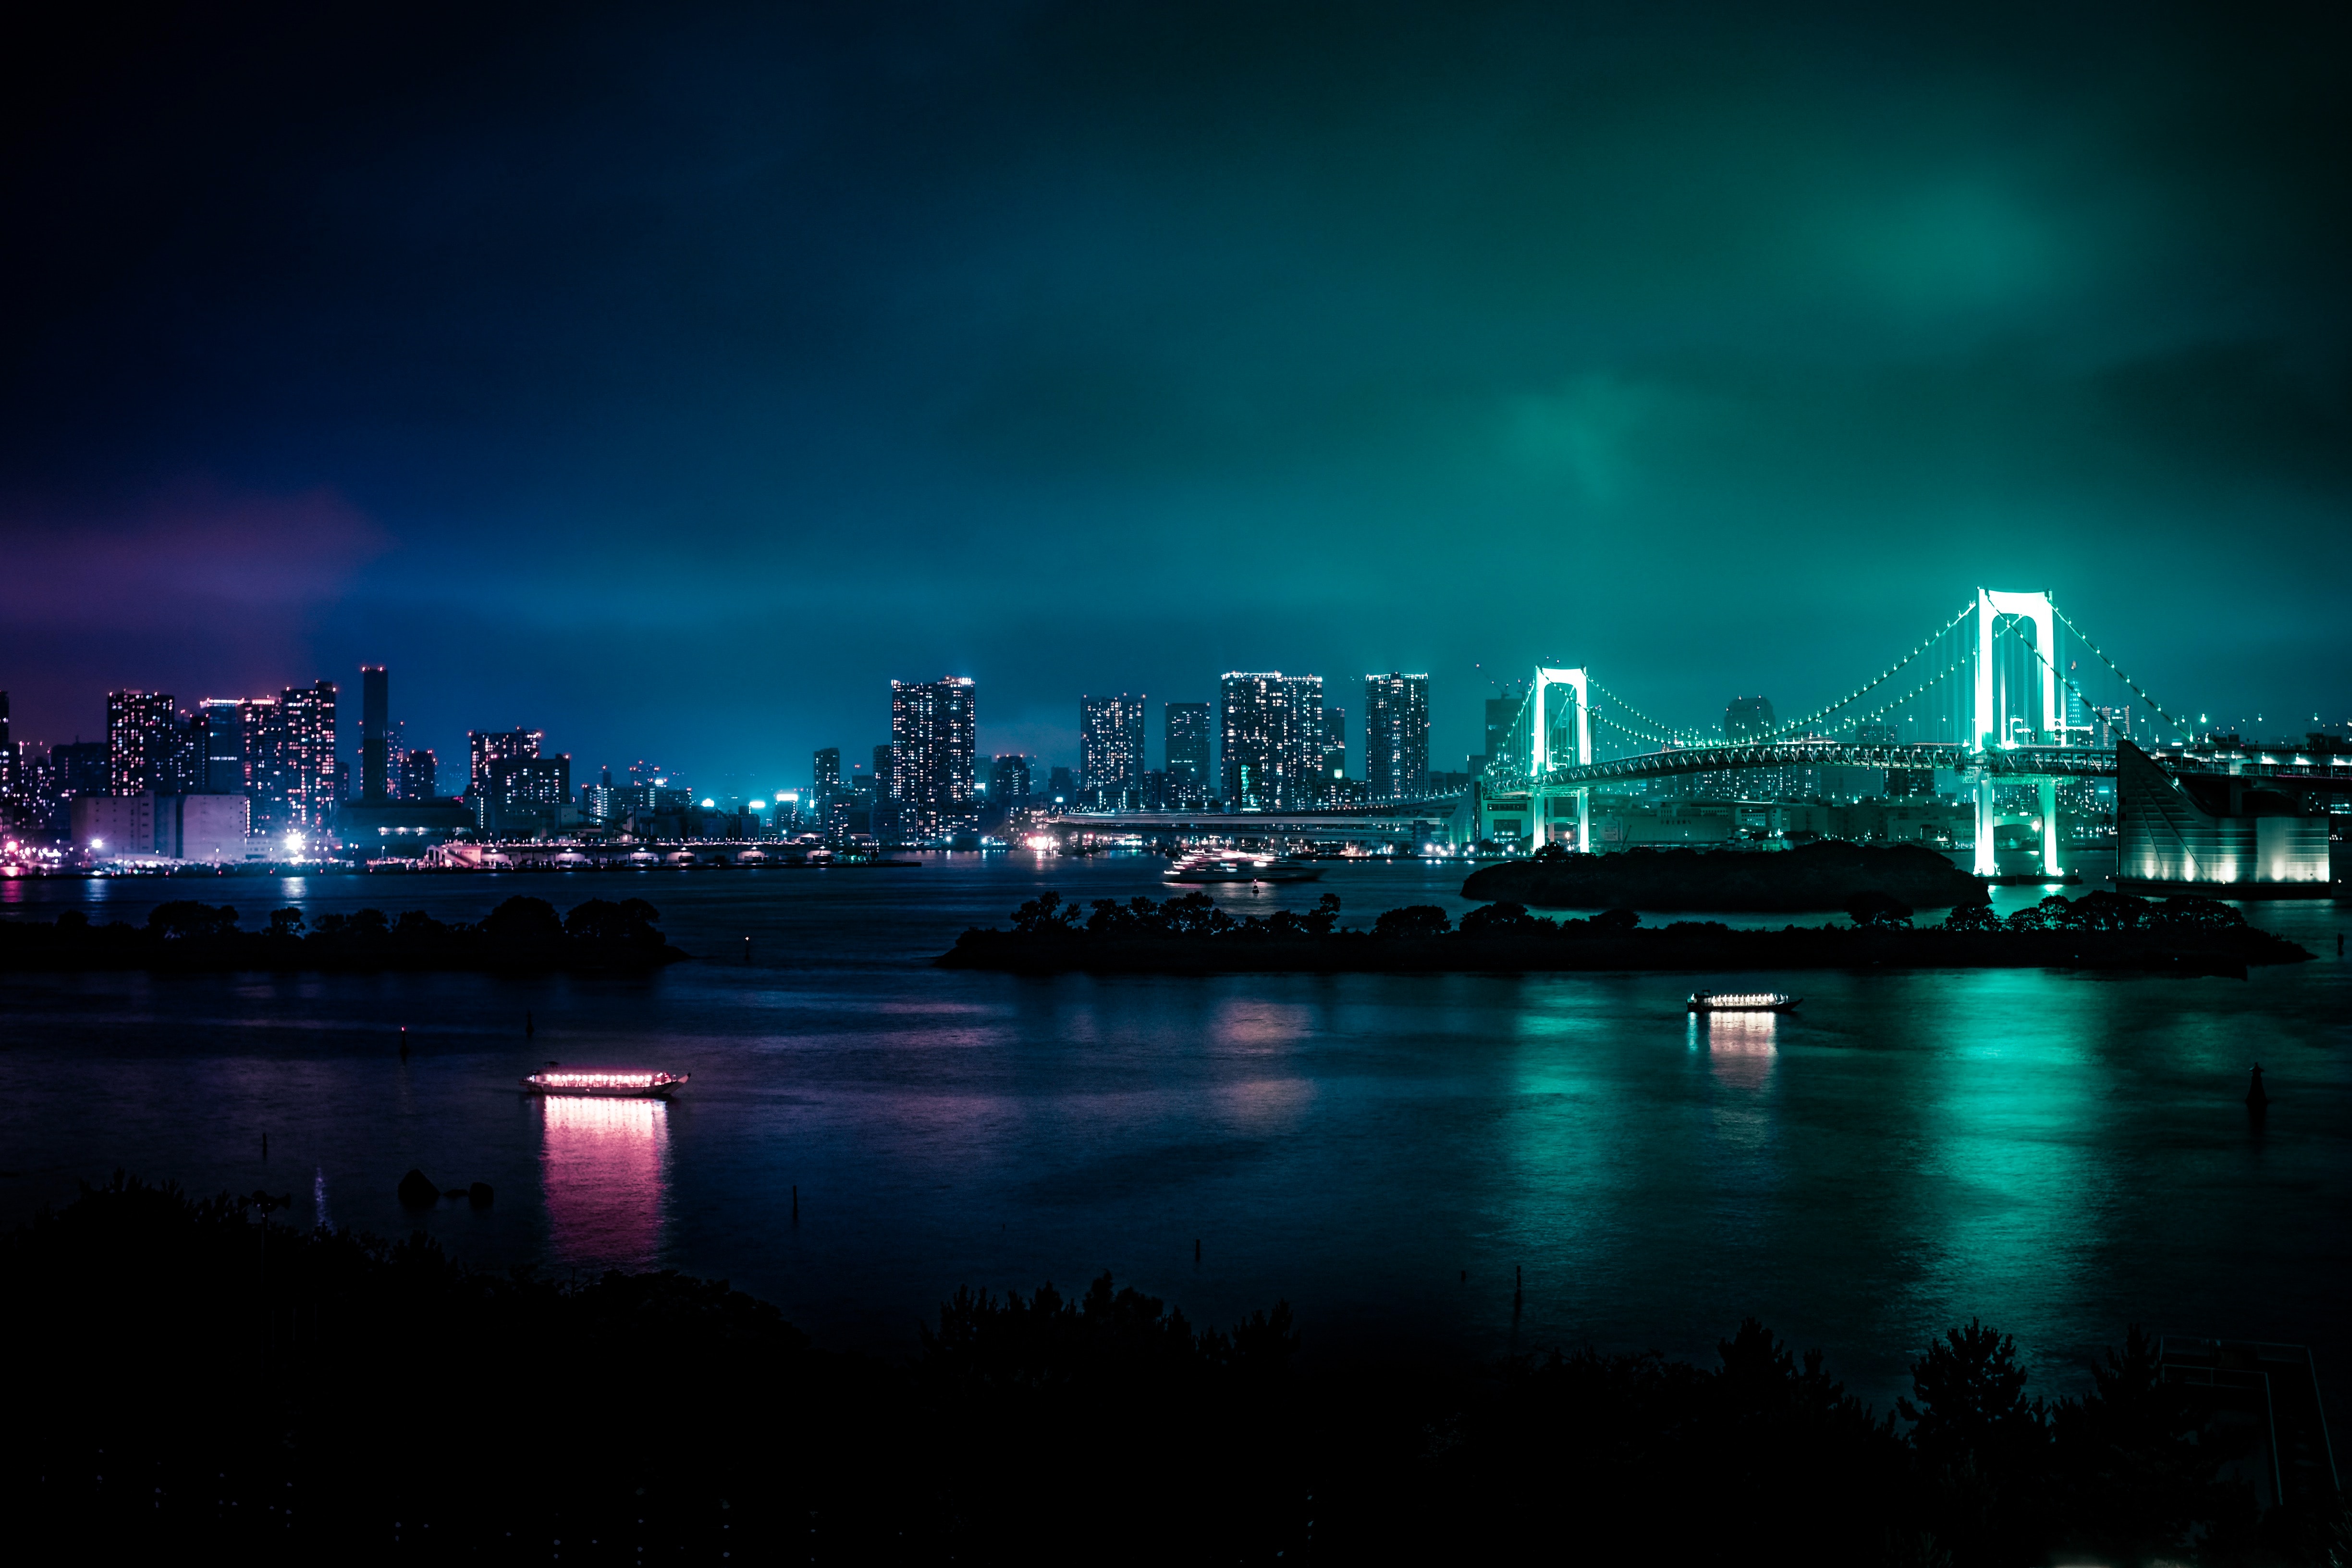 Tokyo Picture [Scenic Travel Photo]. Download Free Image